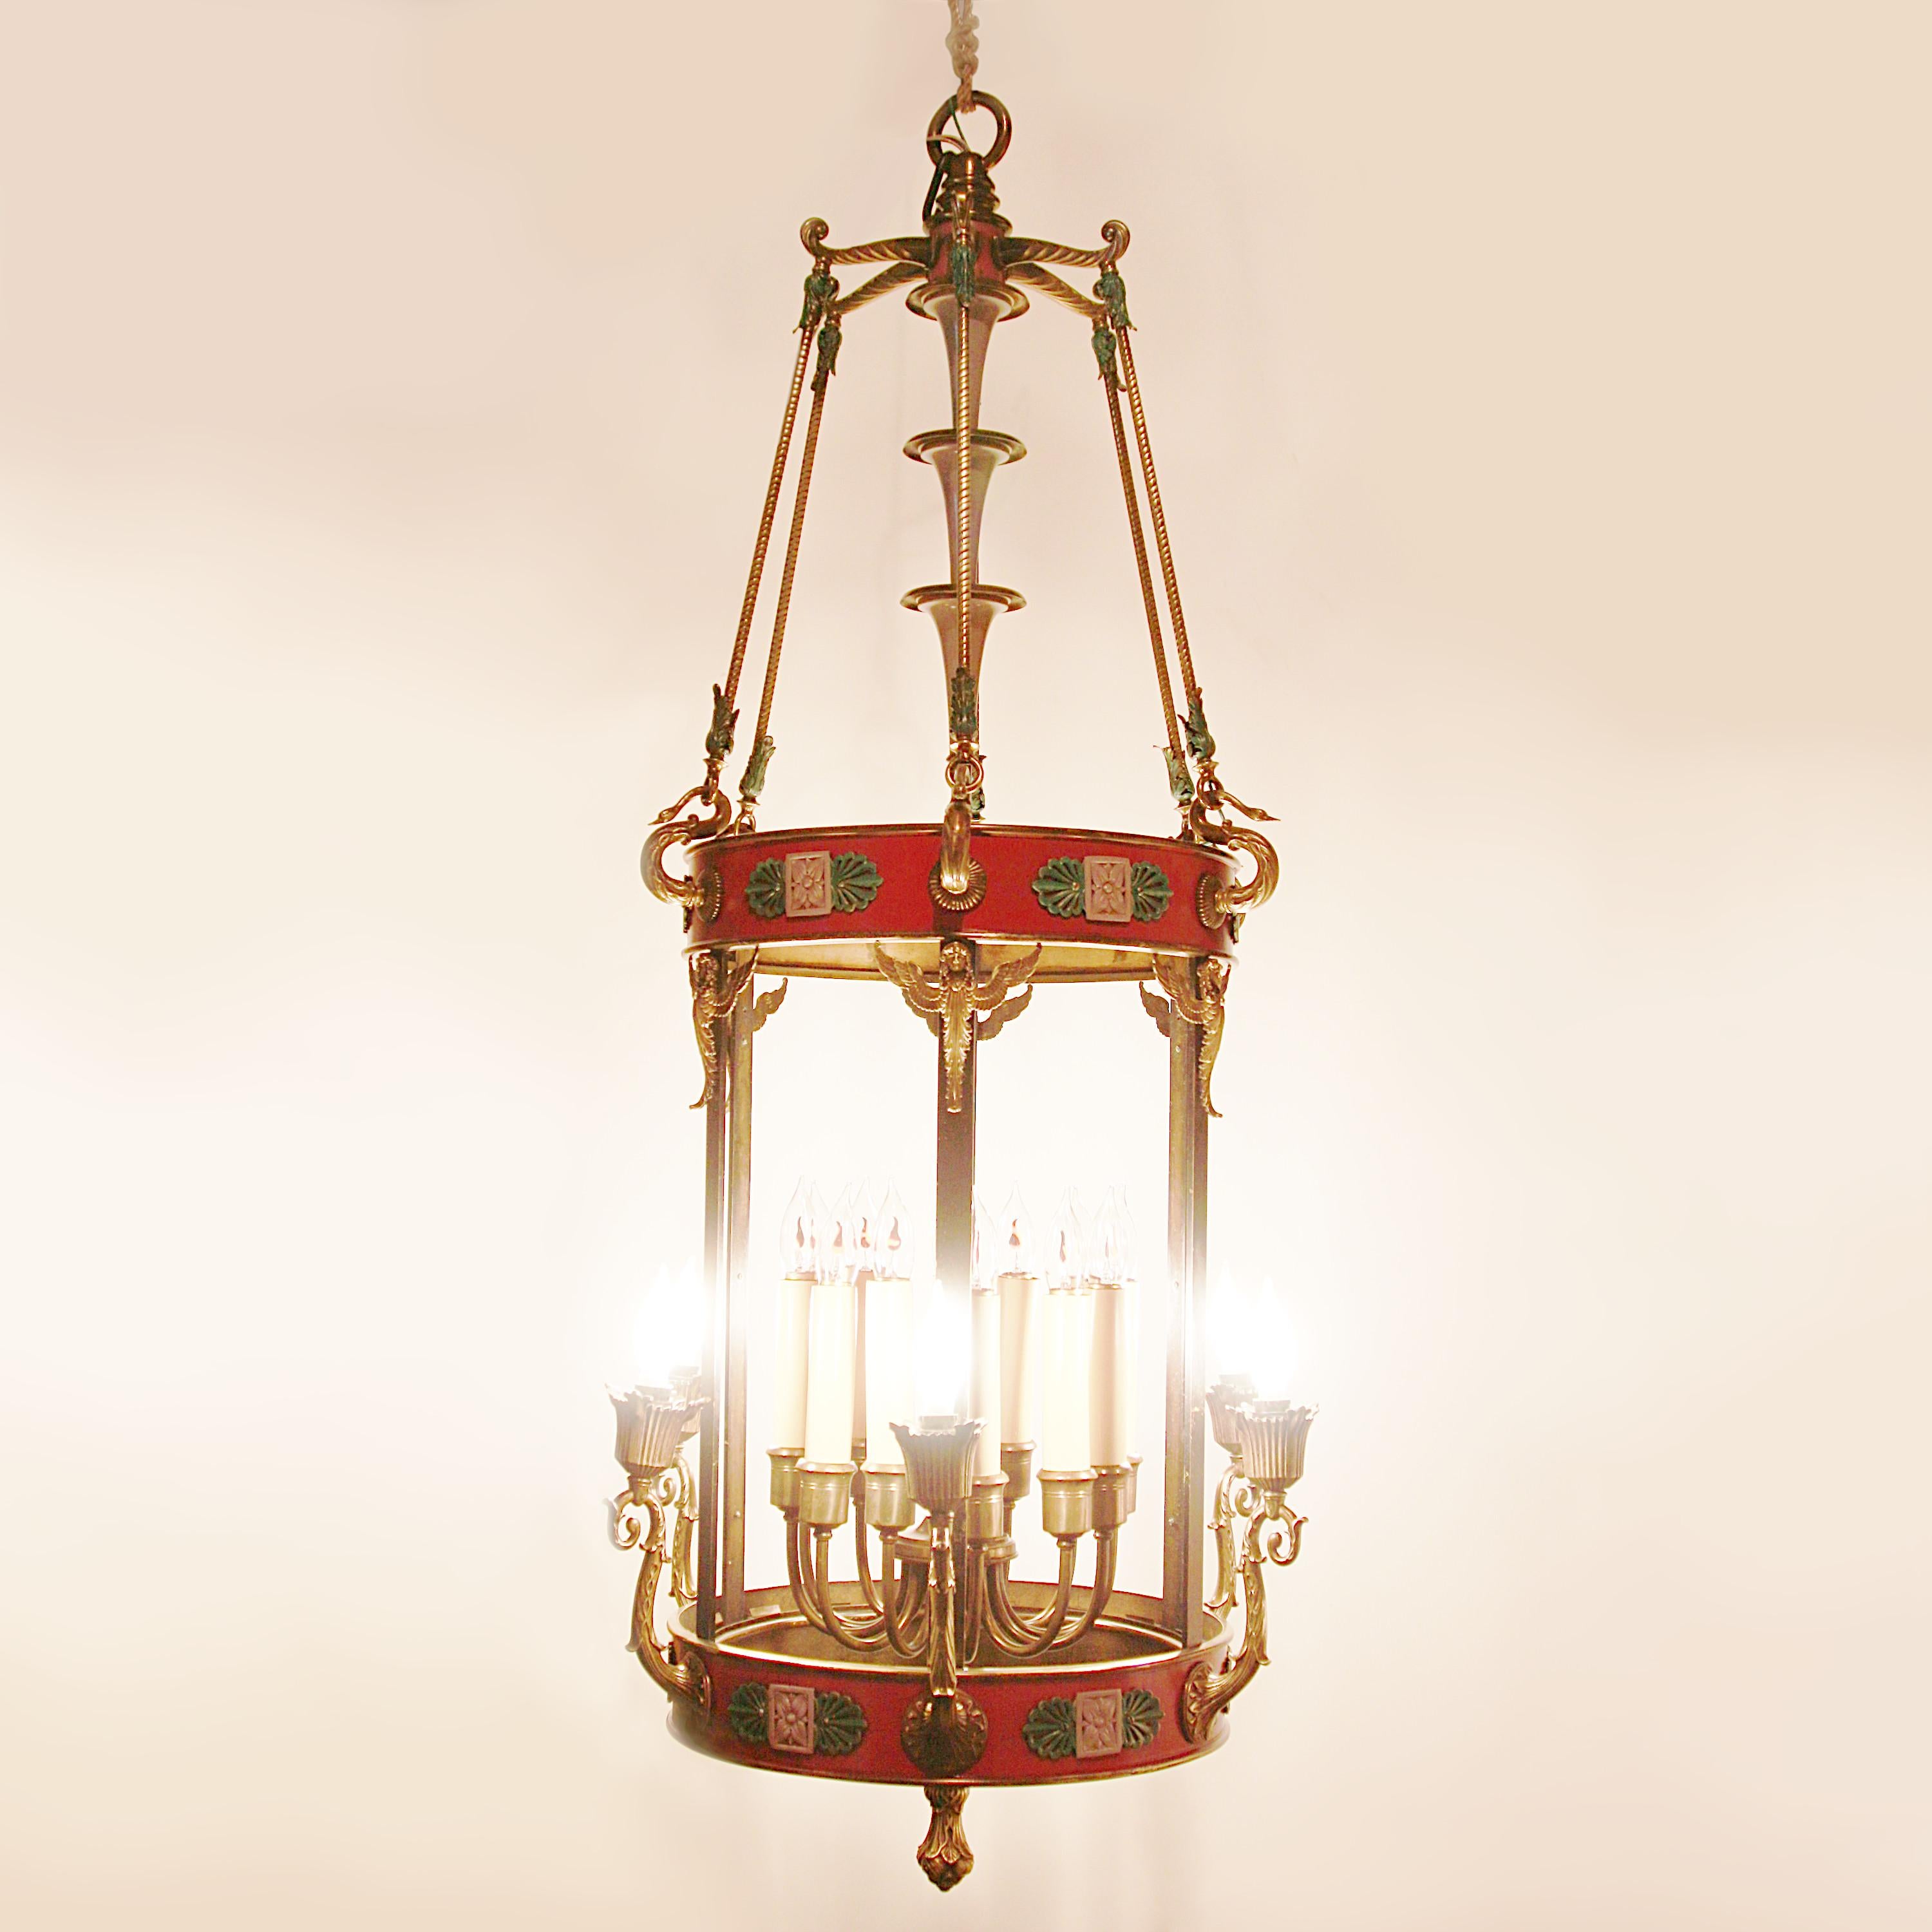 This Spectacular, custom-made chandelier is not only a work of art, but an astonishing piece of early 20th-century American craftsmanship!

Chandelier features:

- Solid Brass construction
- (6) Outward-facing brass sconces
- (12) Interior